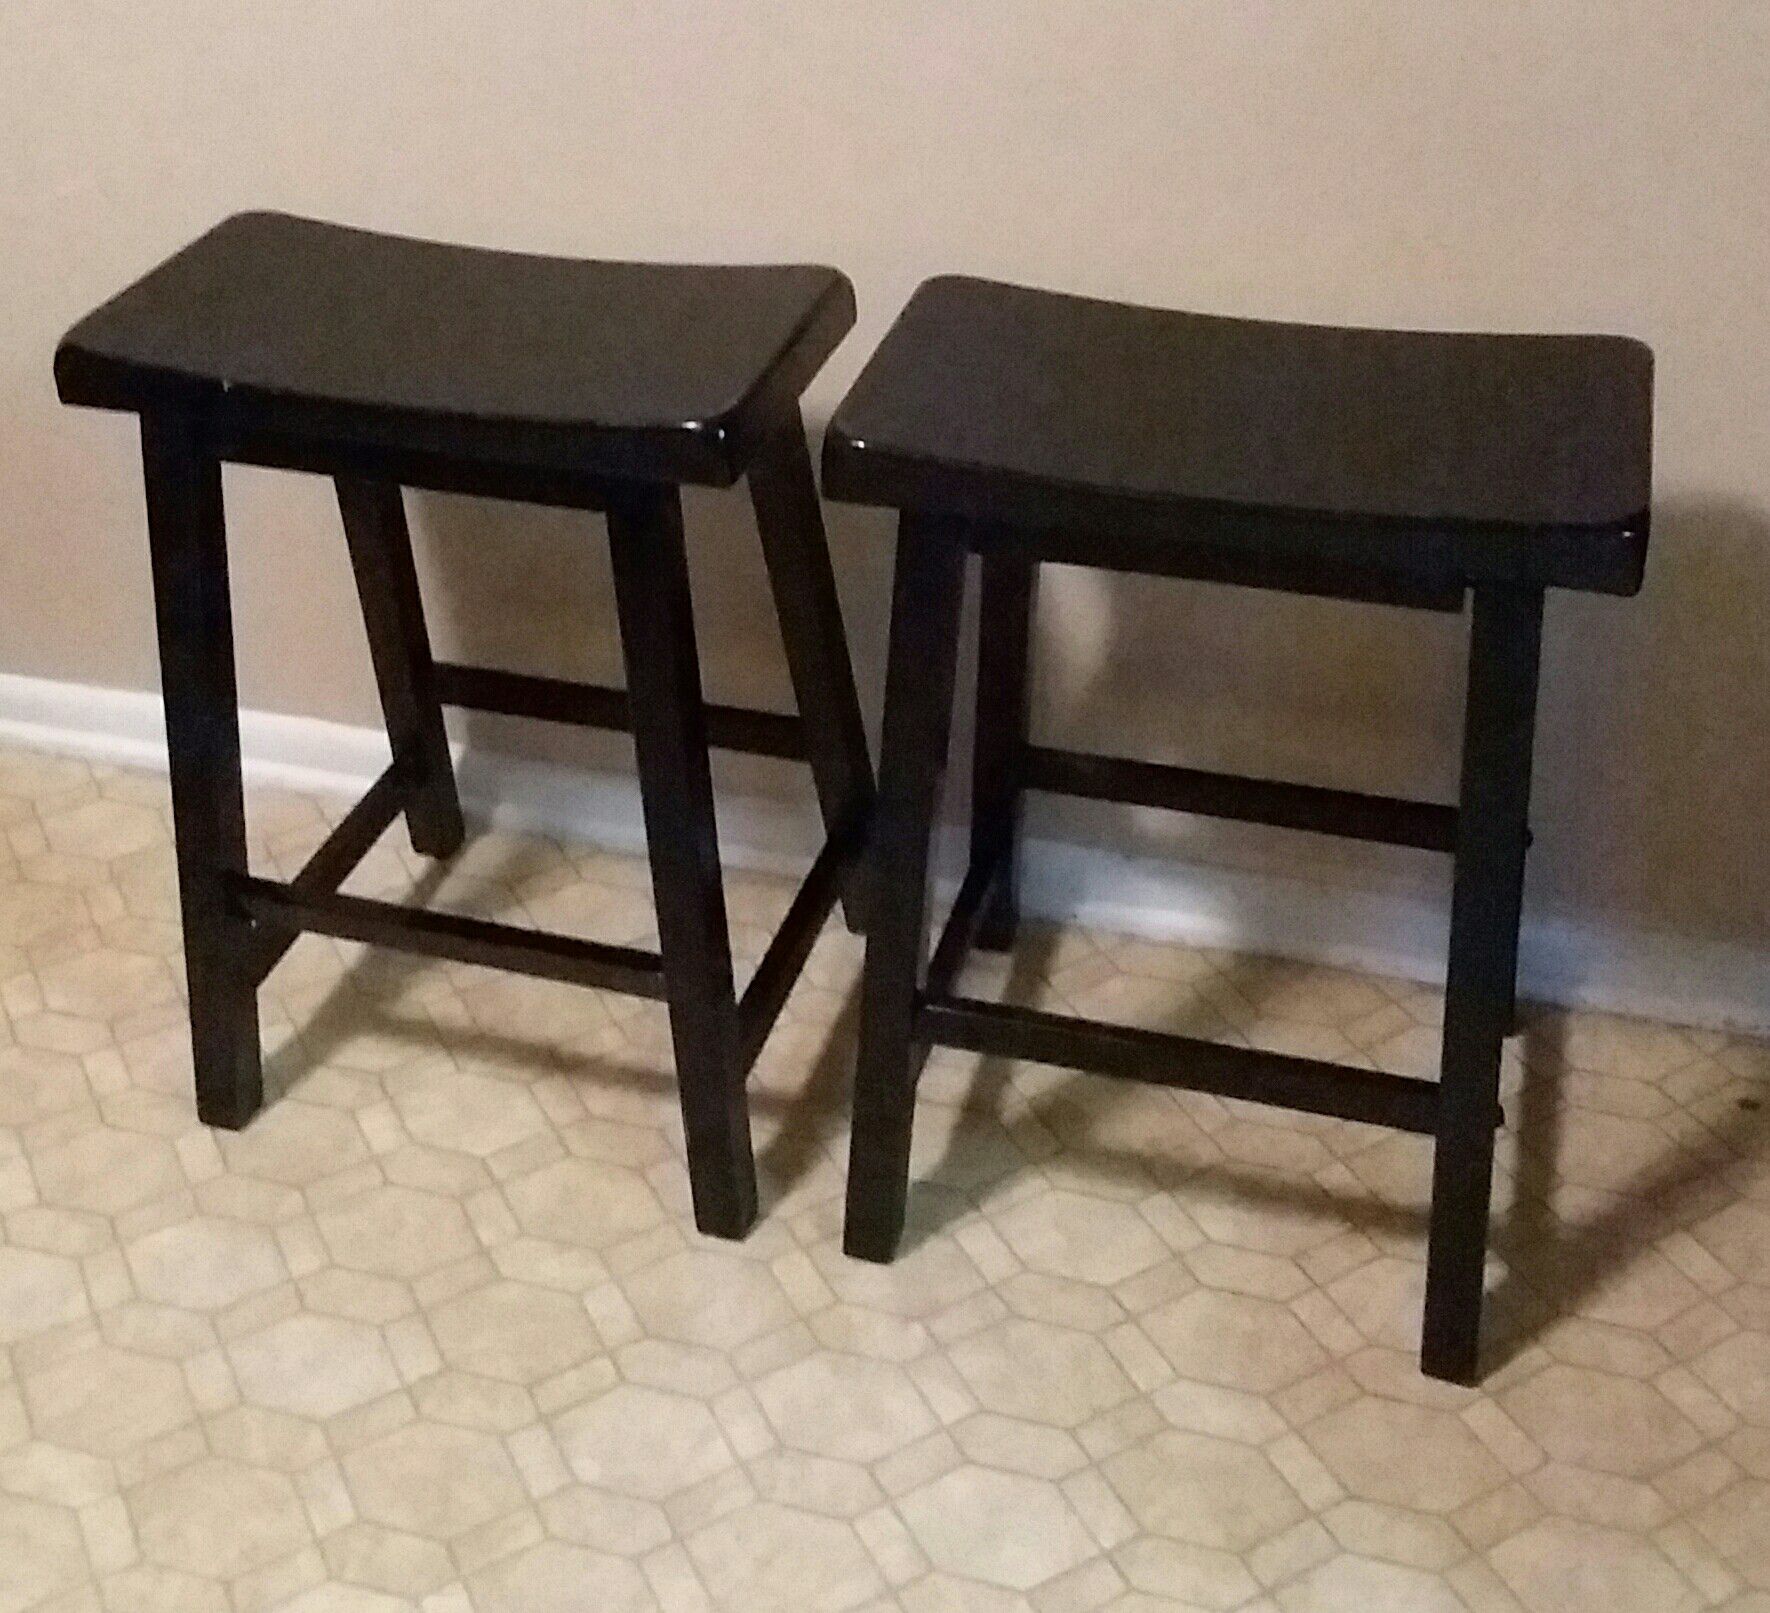 (Two) Ebony Black/Solid Wood Stools (Excellent Condition)